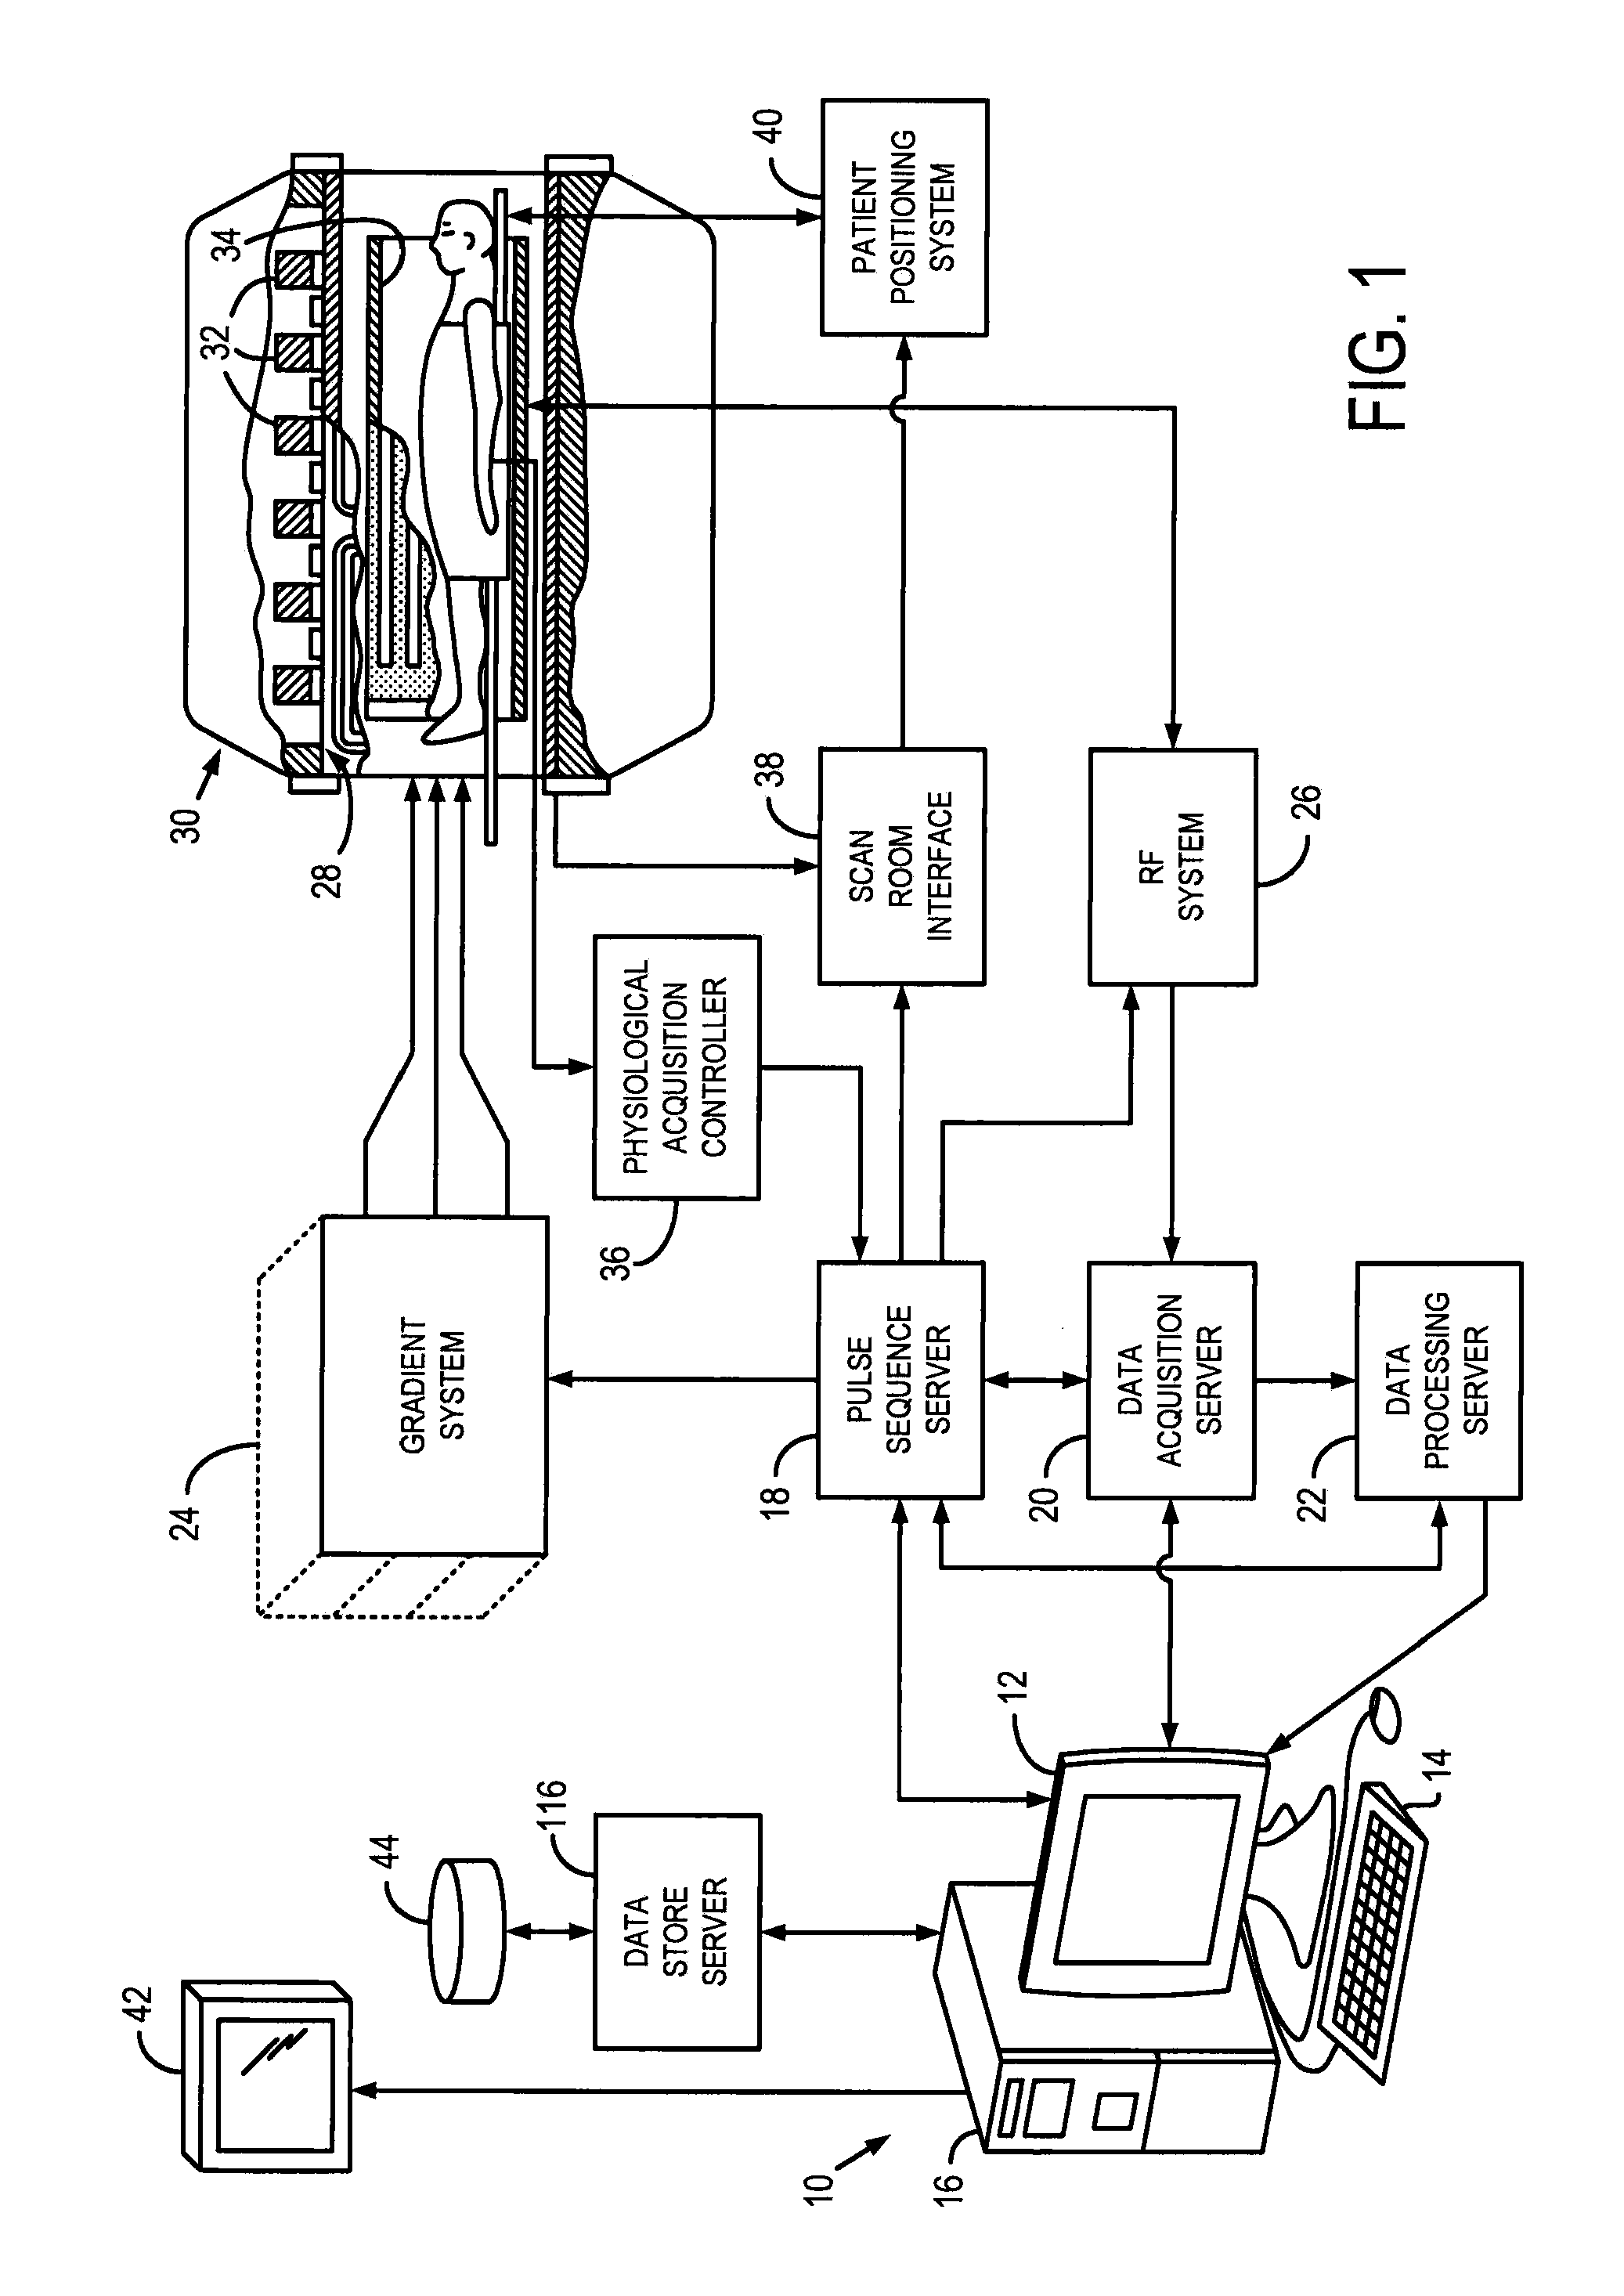 System and method for magnetic resonance angiography coordinated to cardiac phase using spin labeling